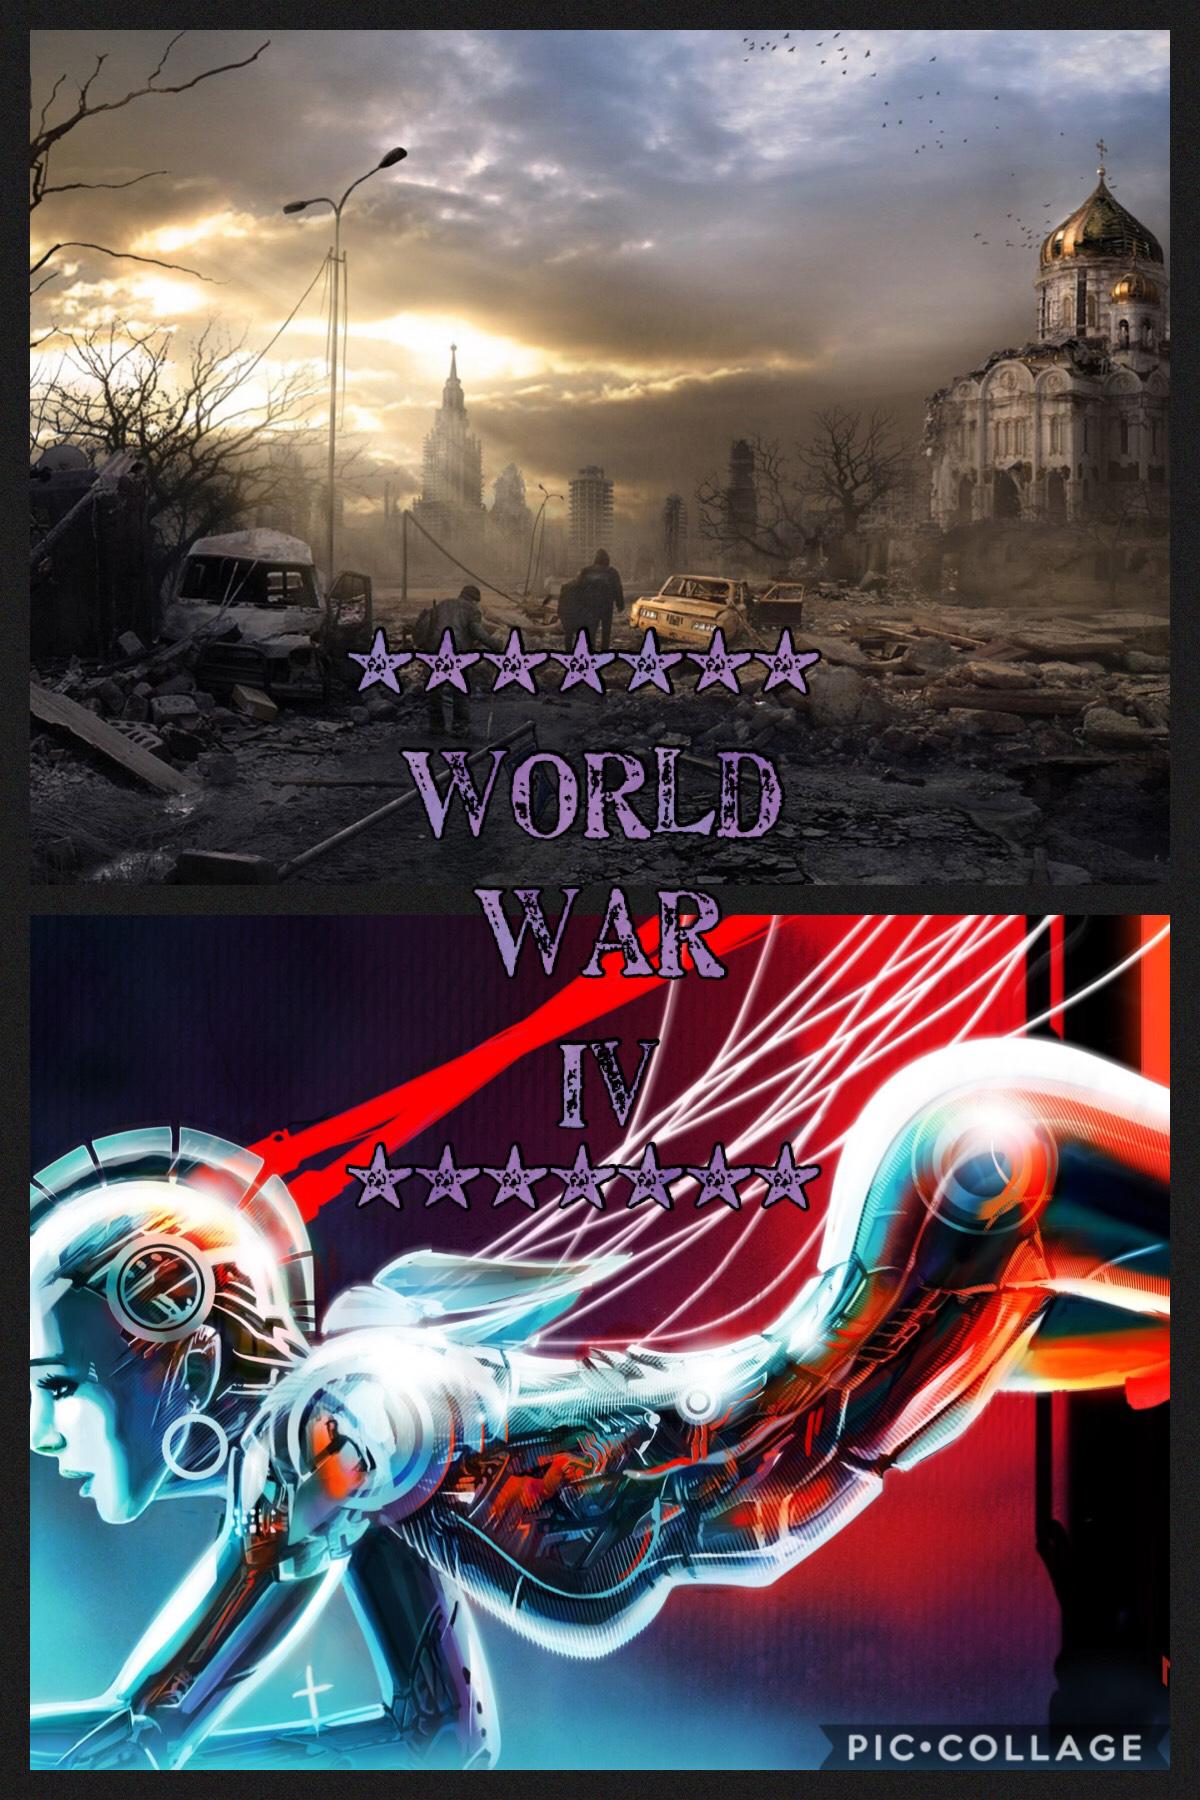 Check out my Story on Episode! World War IV! 